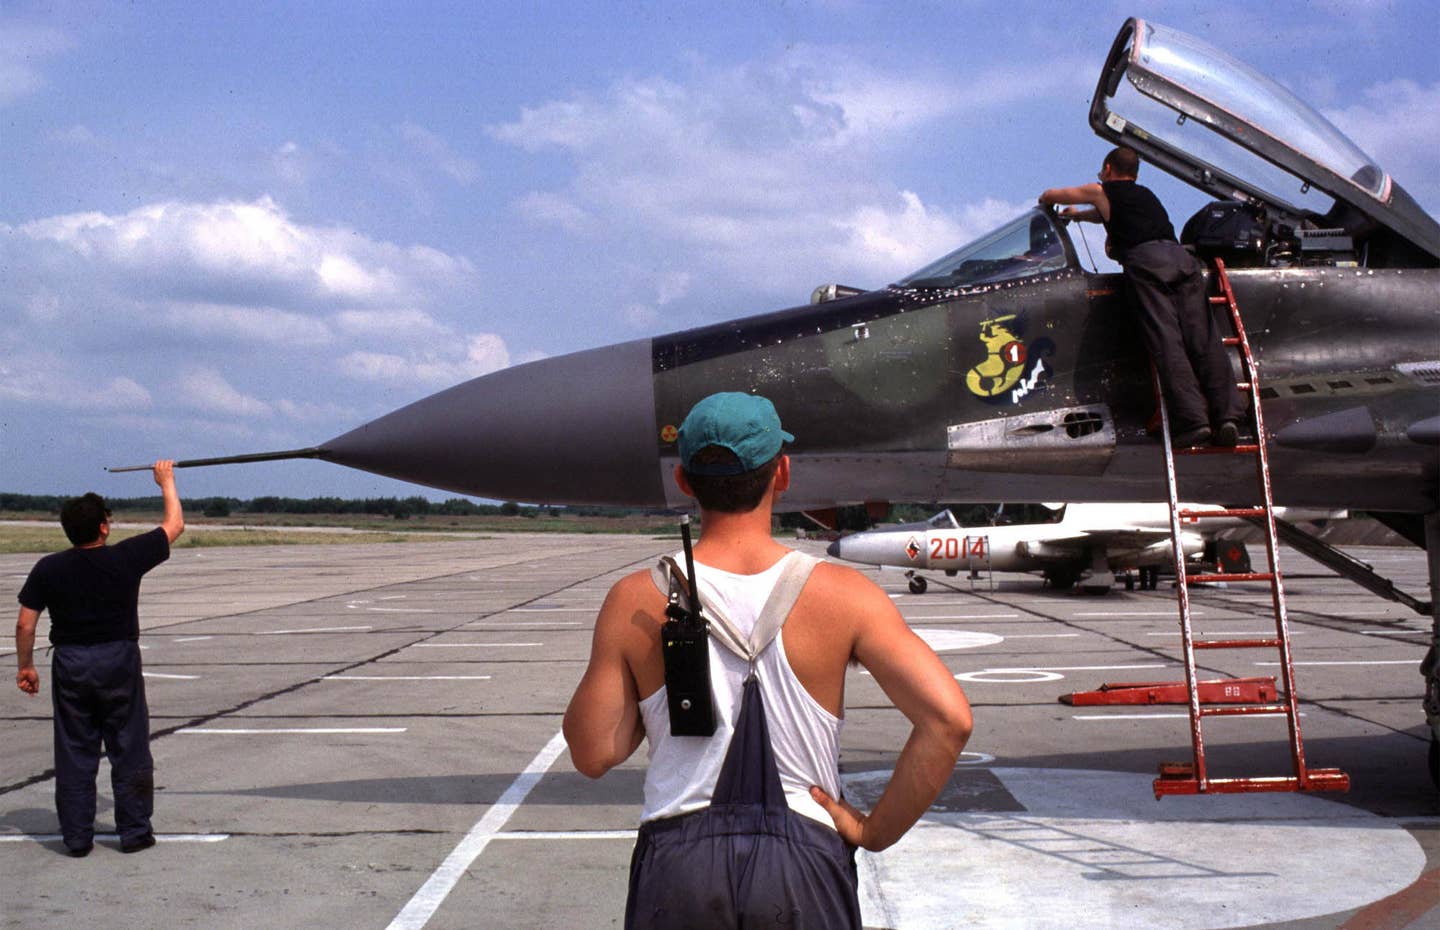 Ground crew prepare a Polish Air Force MiG-29A during a joint French-Polish exercise in Mińsk-Mazowiecki, Poland. The fighter wears the brown and green camouflage scheme that was initially still worn by the former Czechoslovak jets. <em>Photo by Piotr Malecki/Getty Images</em>